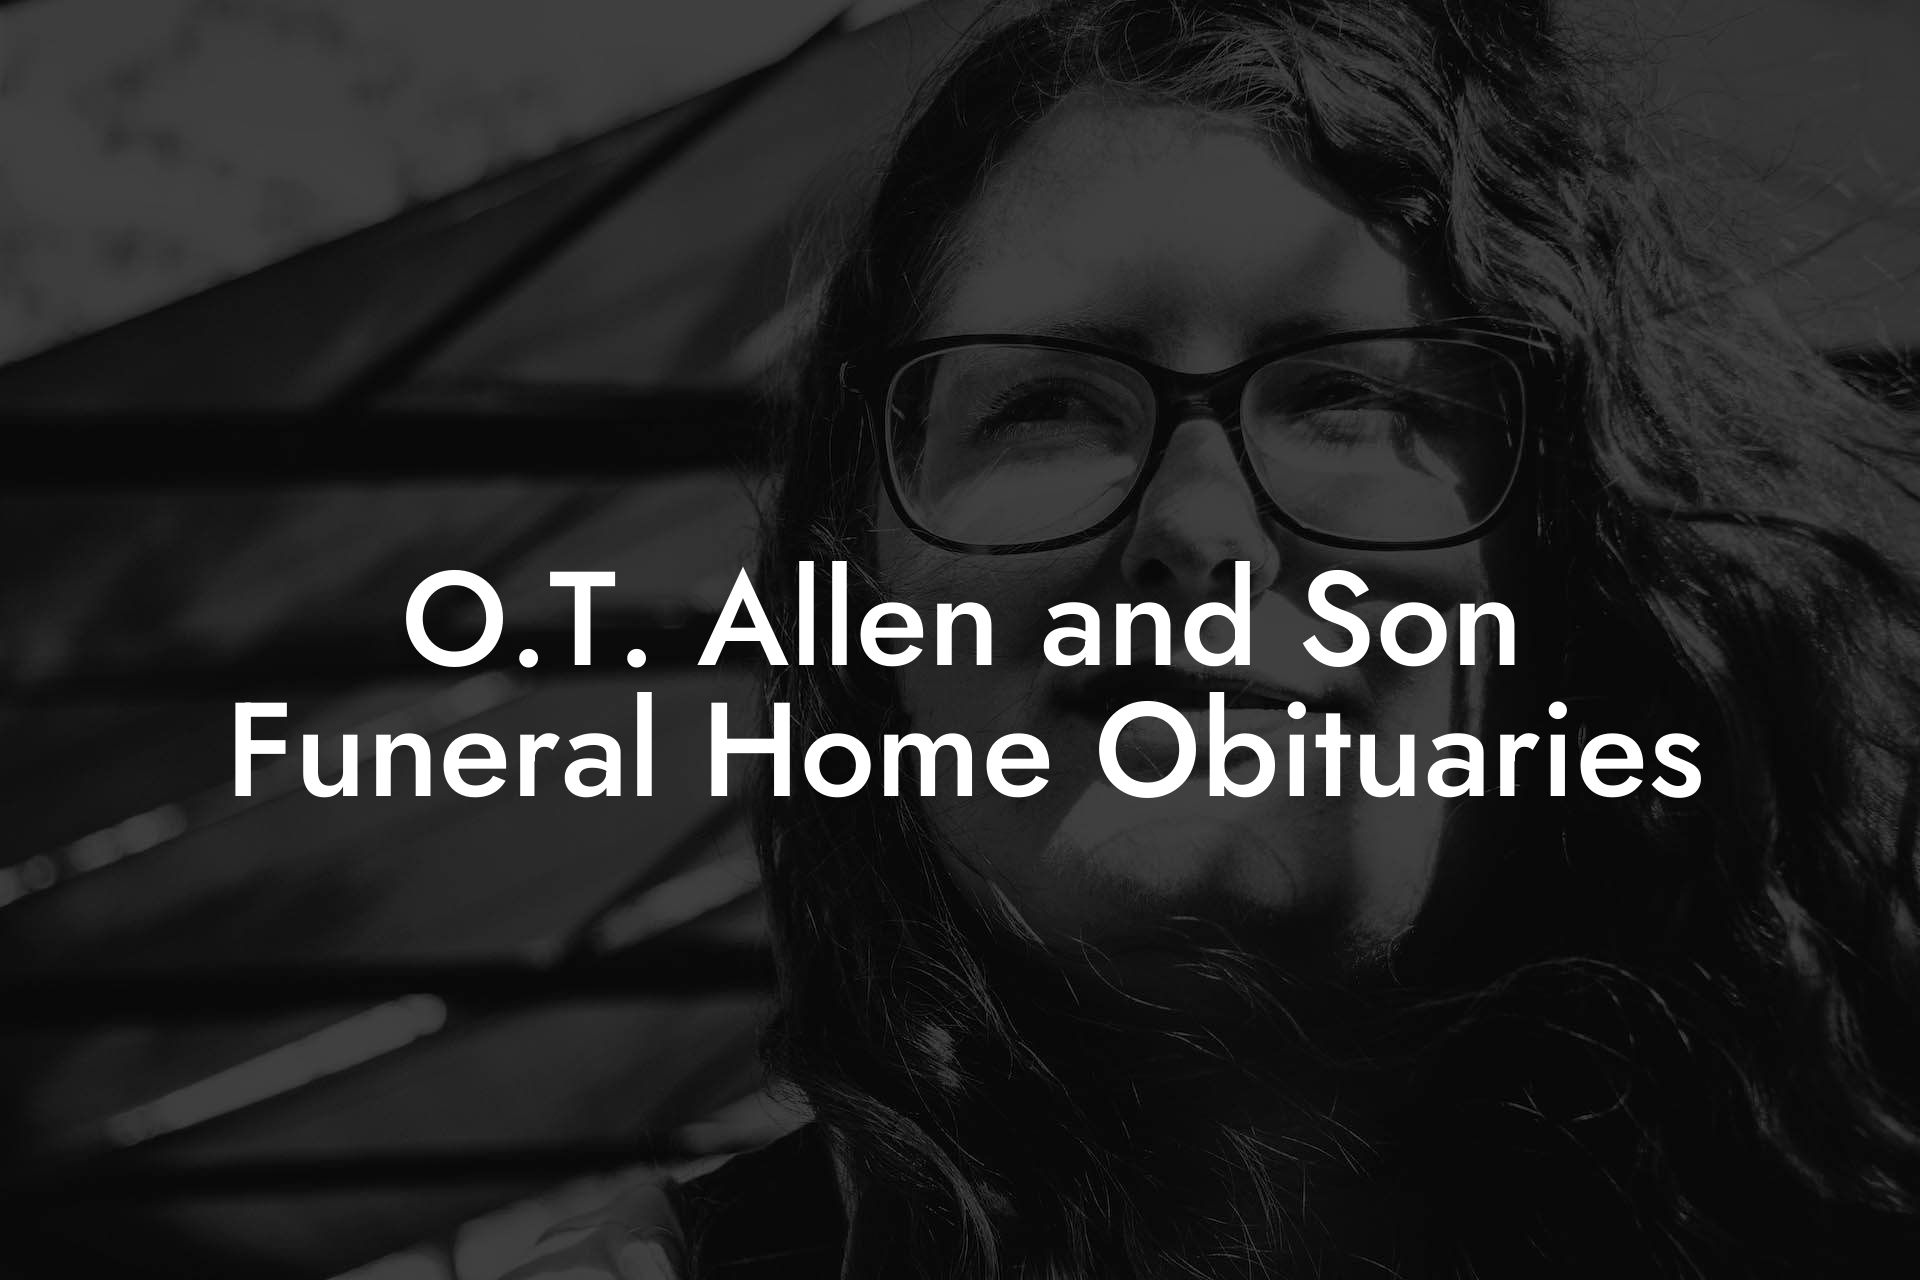 O.T. Allen and Son Funeral Home Obituaries